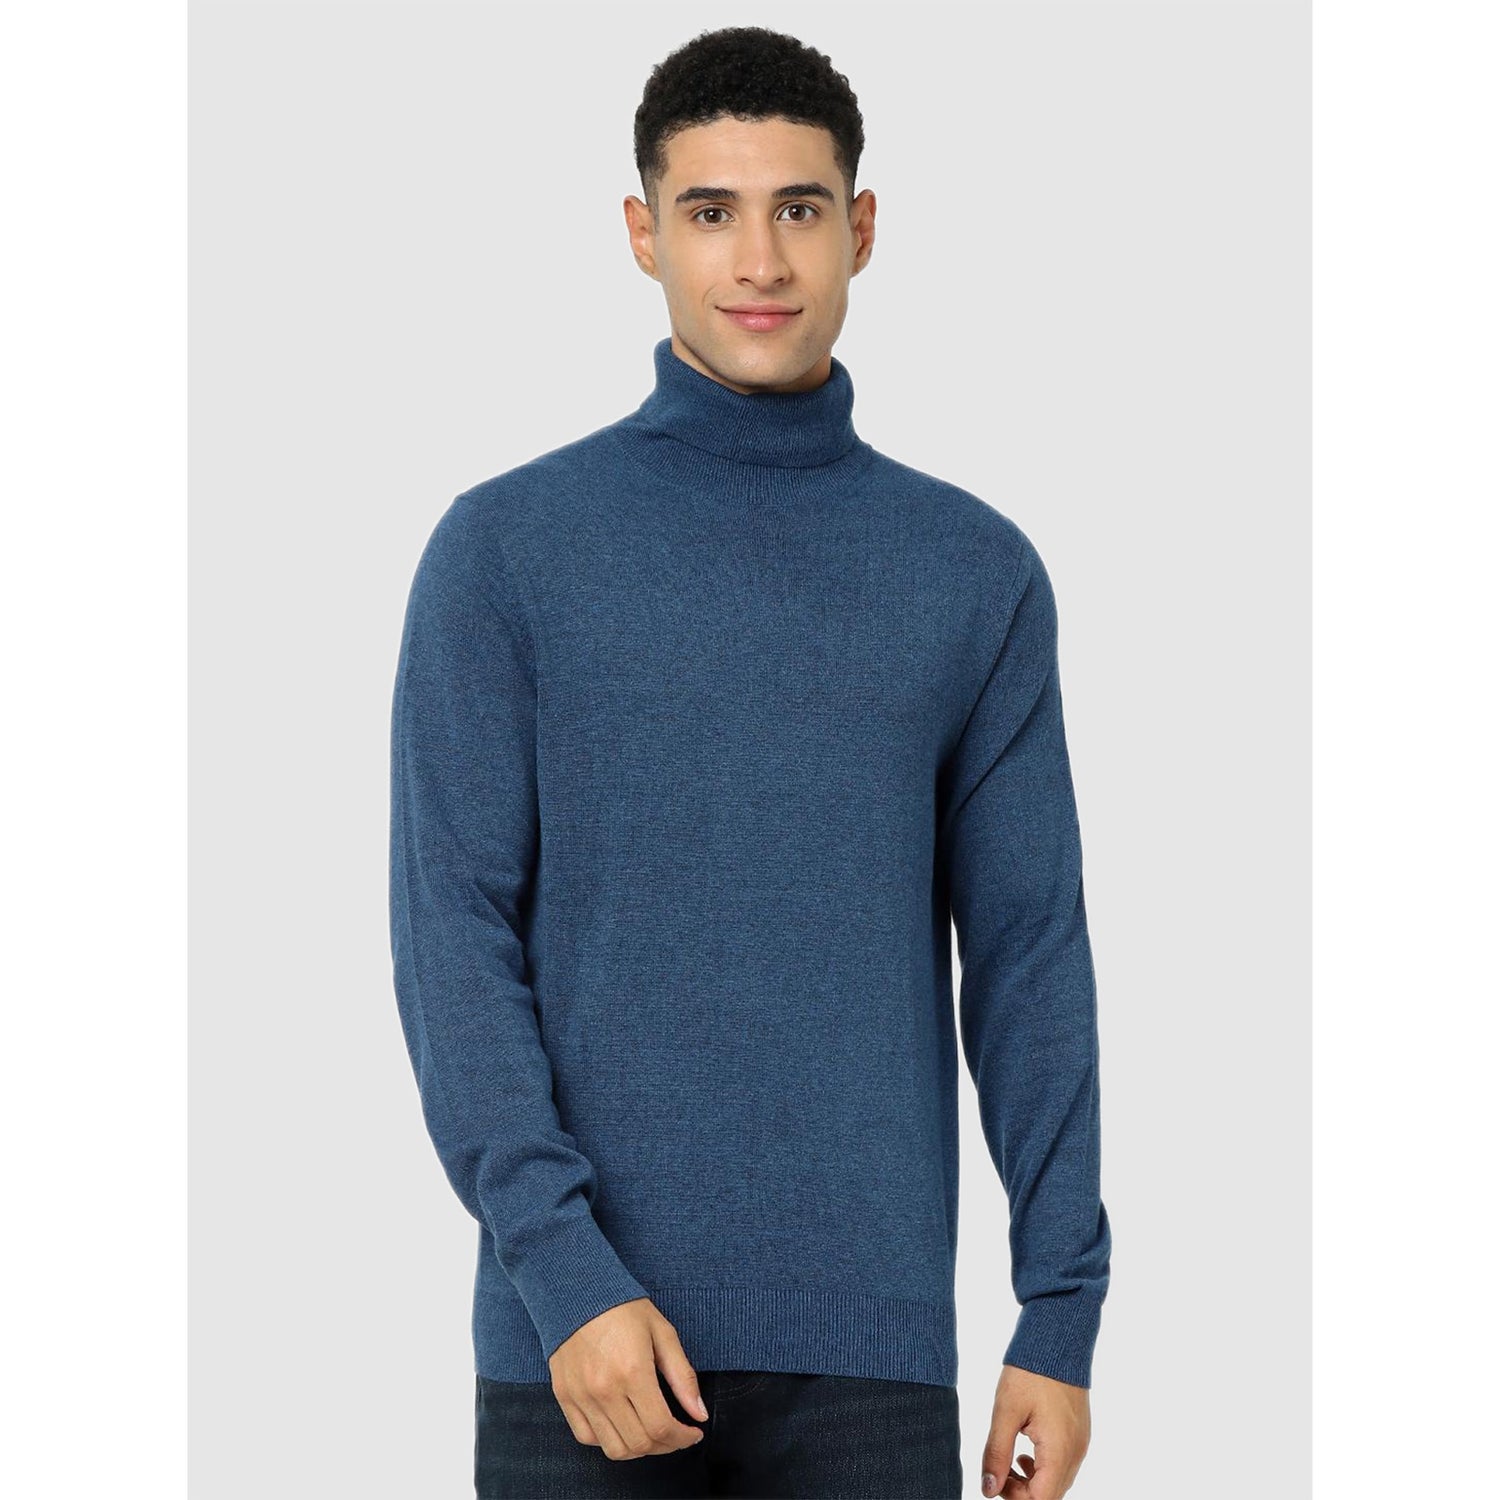 Blue Solid Regular Fit Sweater (Various Sizes)